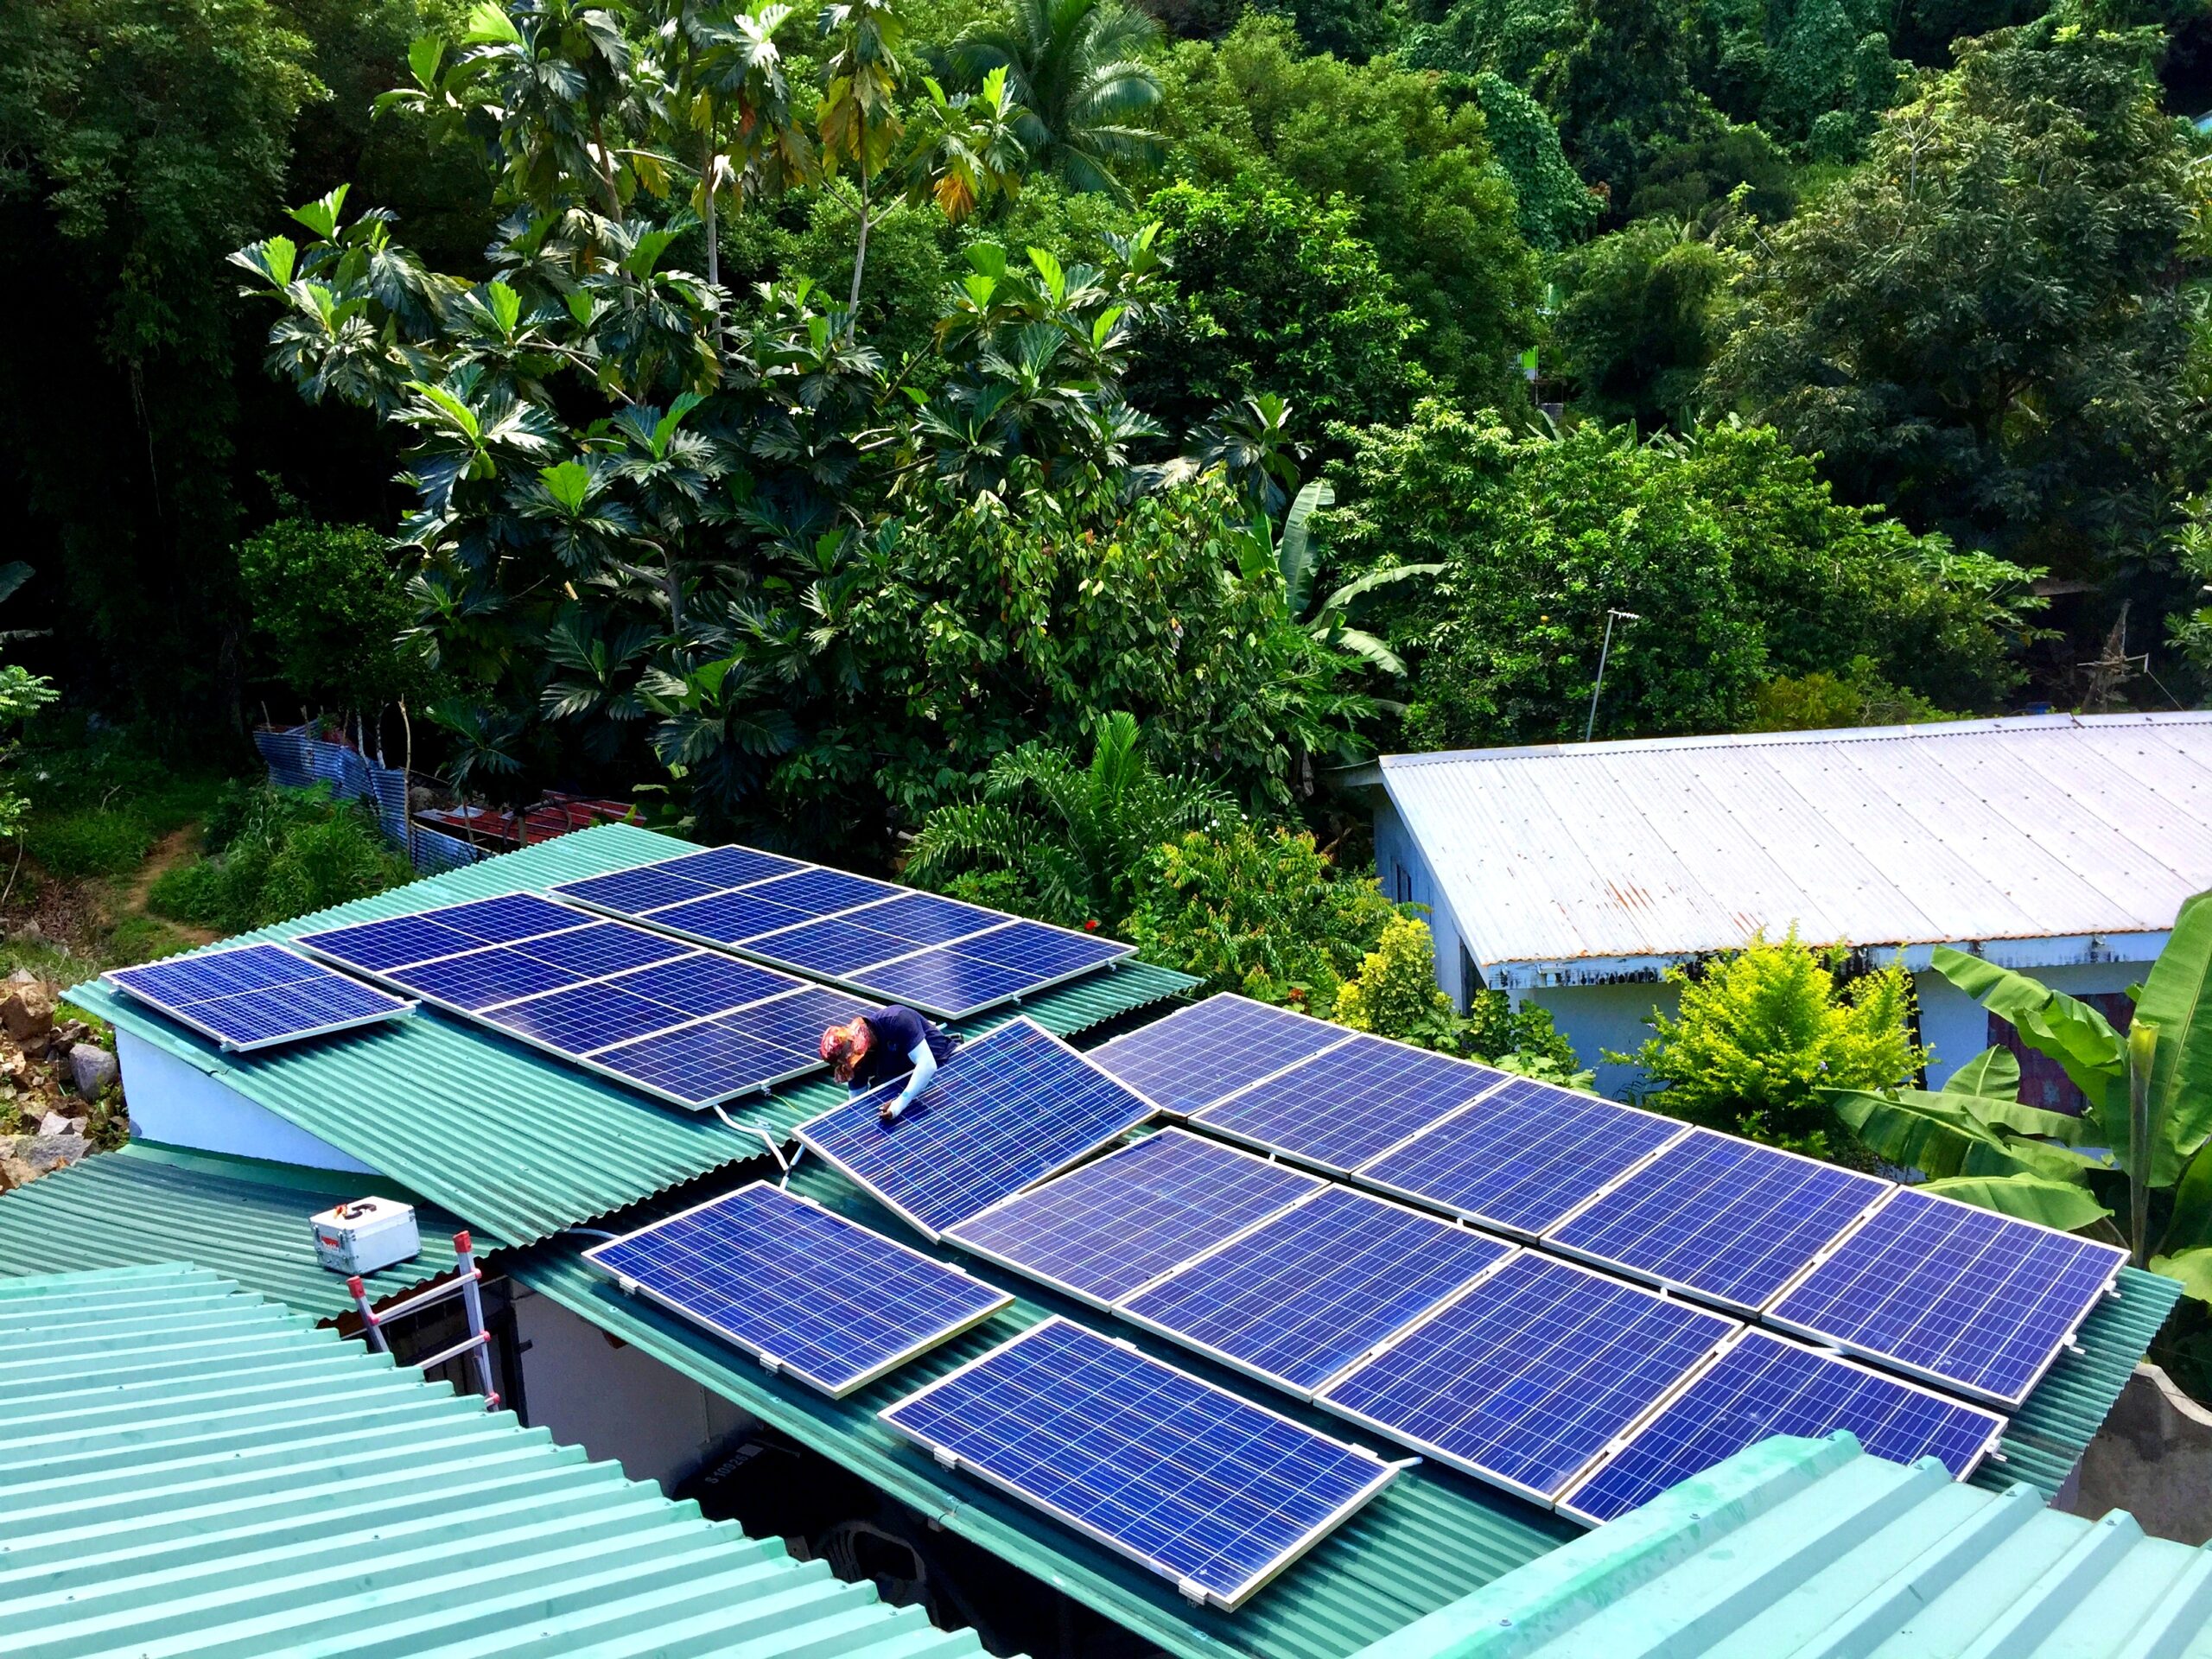 ESS solar photovoltaic PV systems